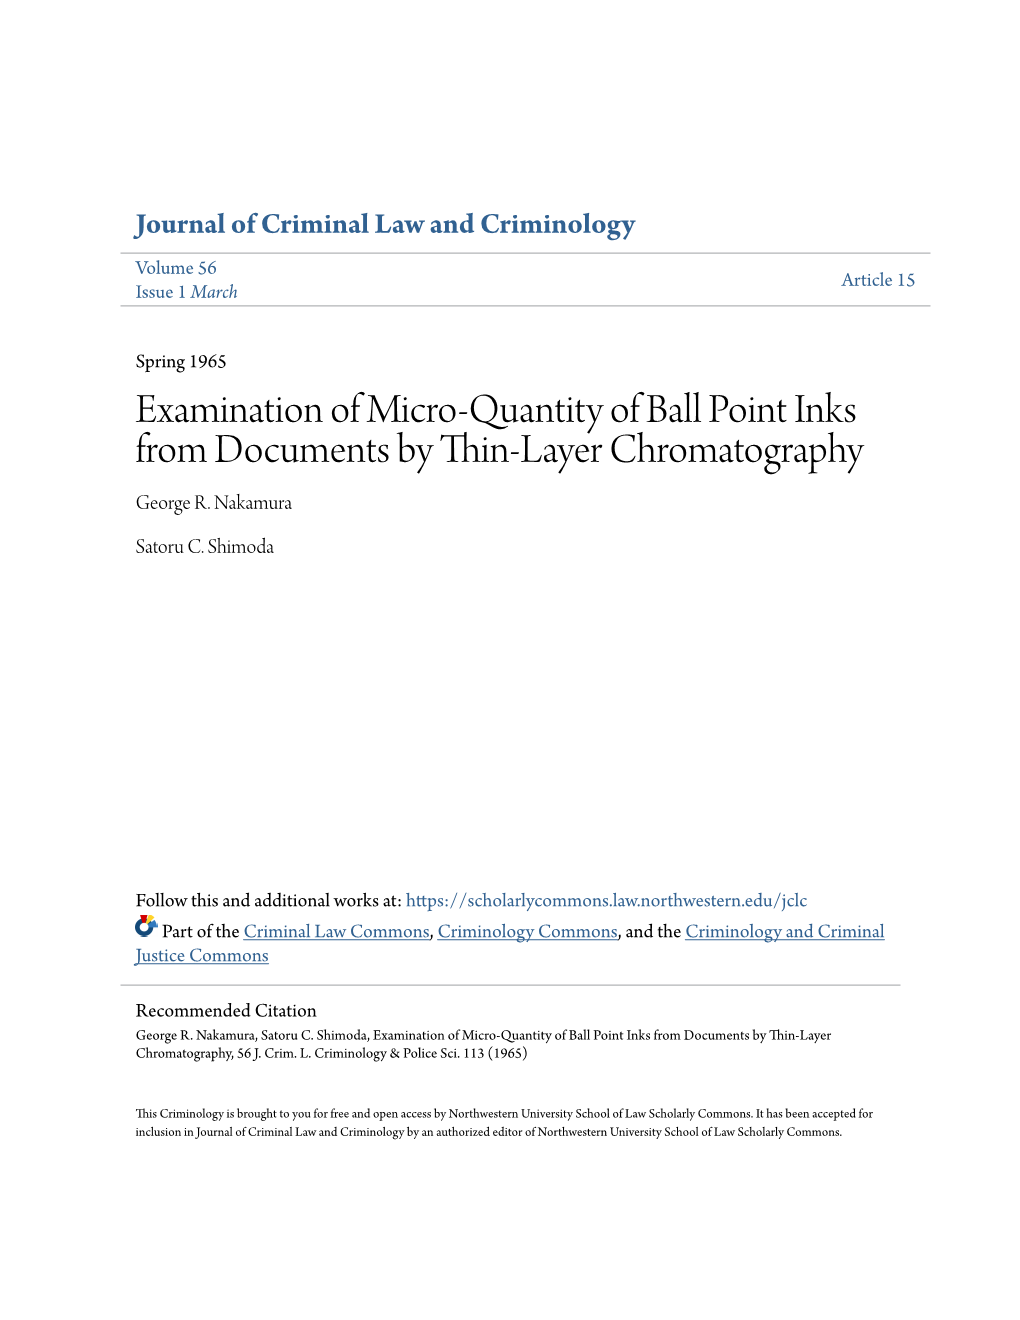 Examination of Micro-Quantity of Ball Point Inks from Documents by Thin-Layer Chromatography George R